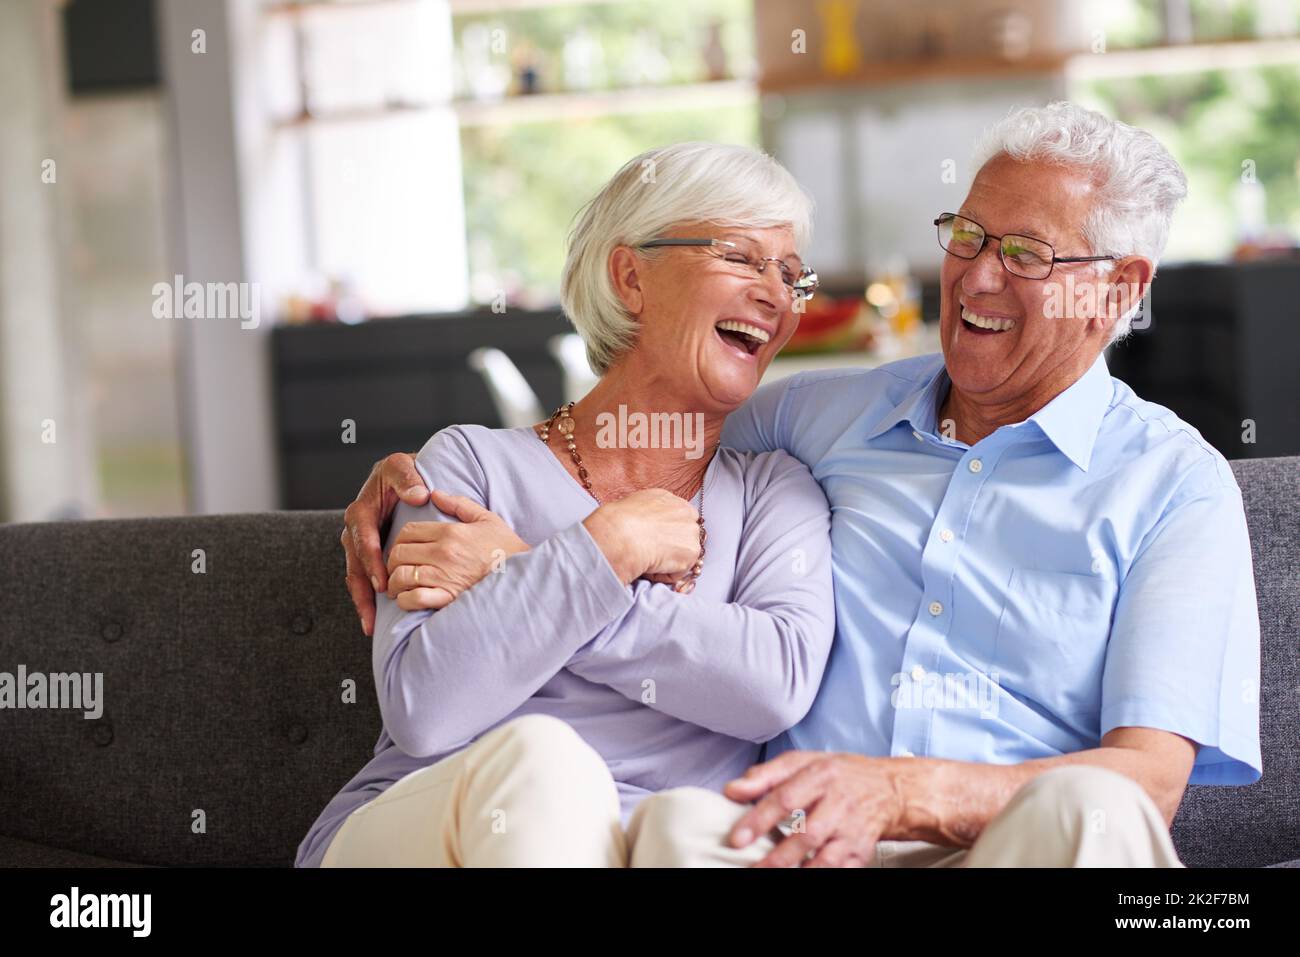 Shot of a senior couple enjoying each others company at home. Stock Photo